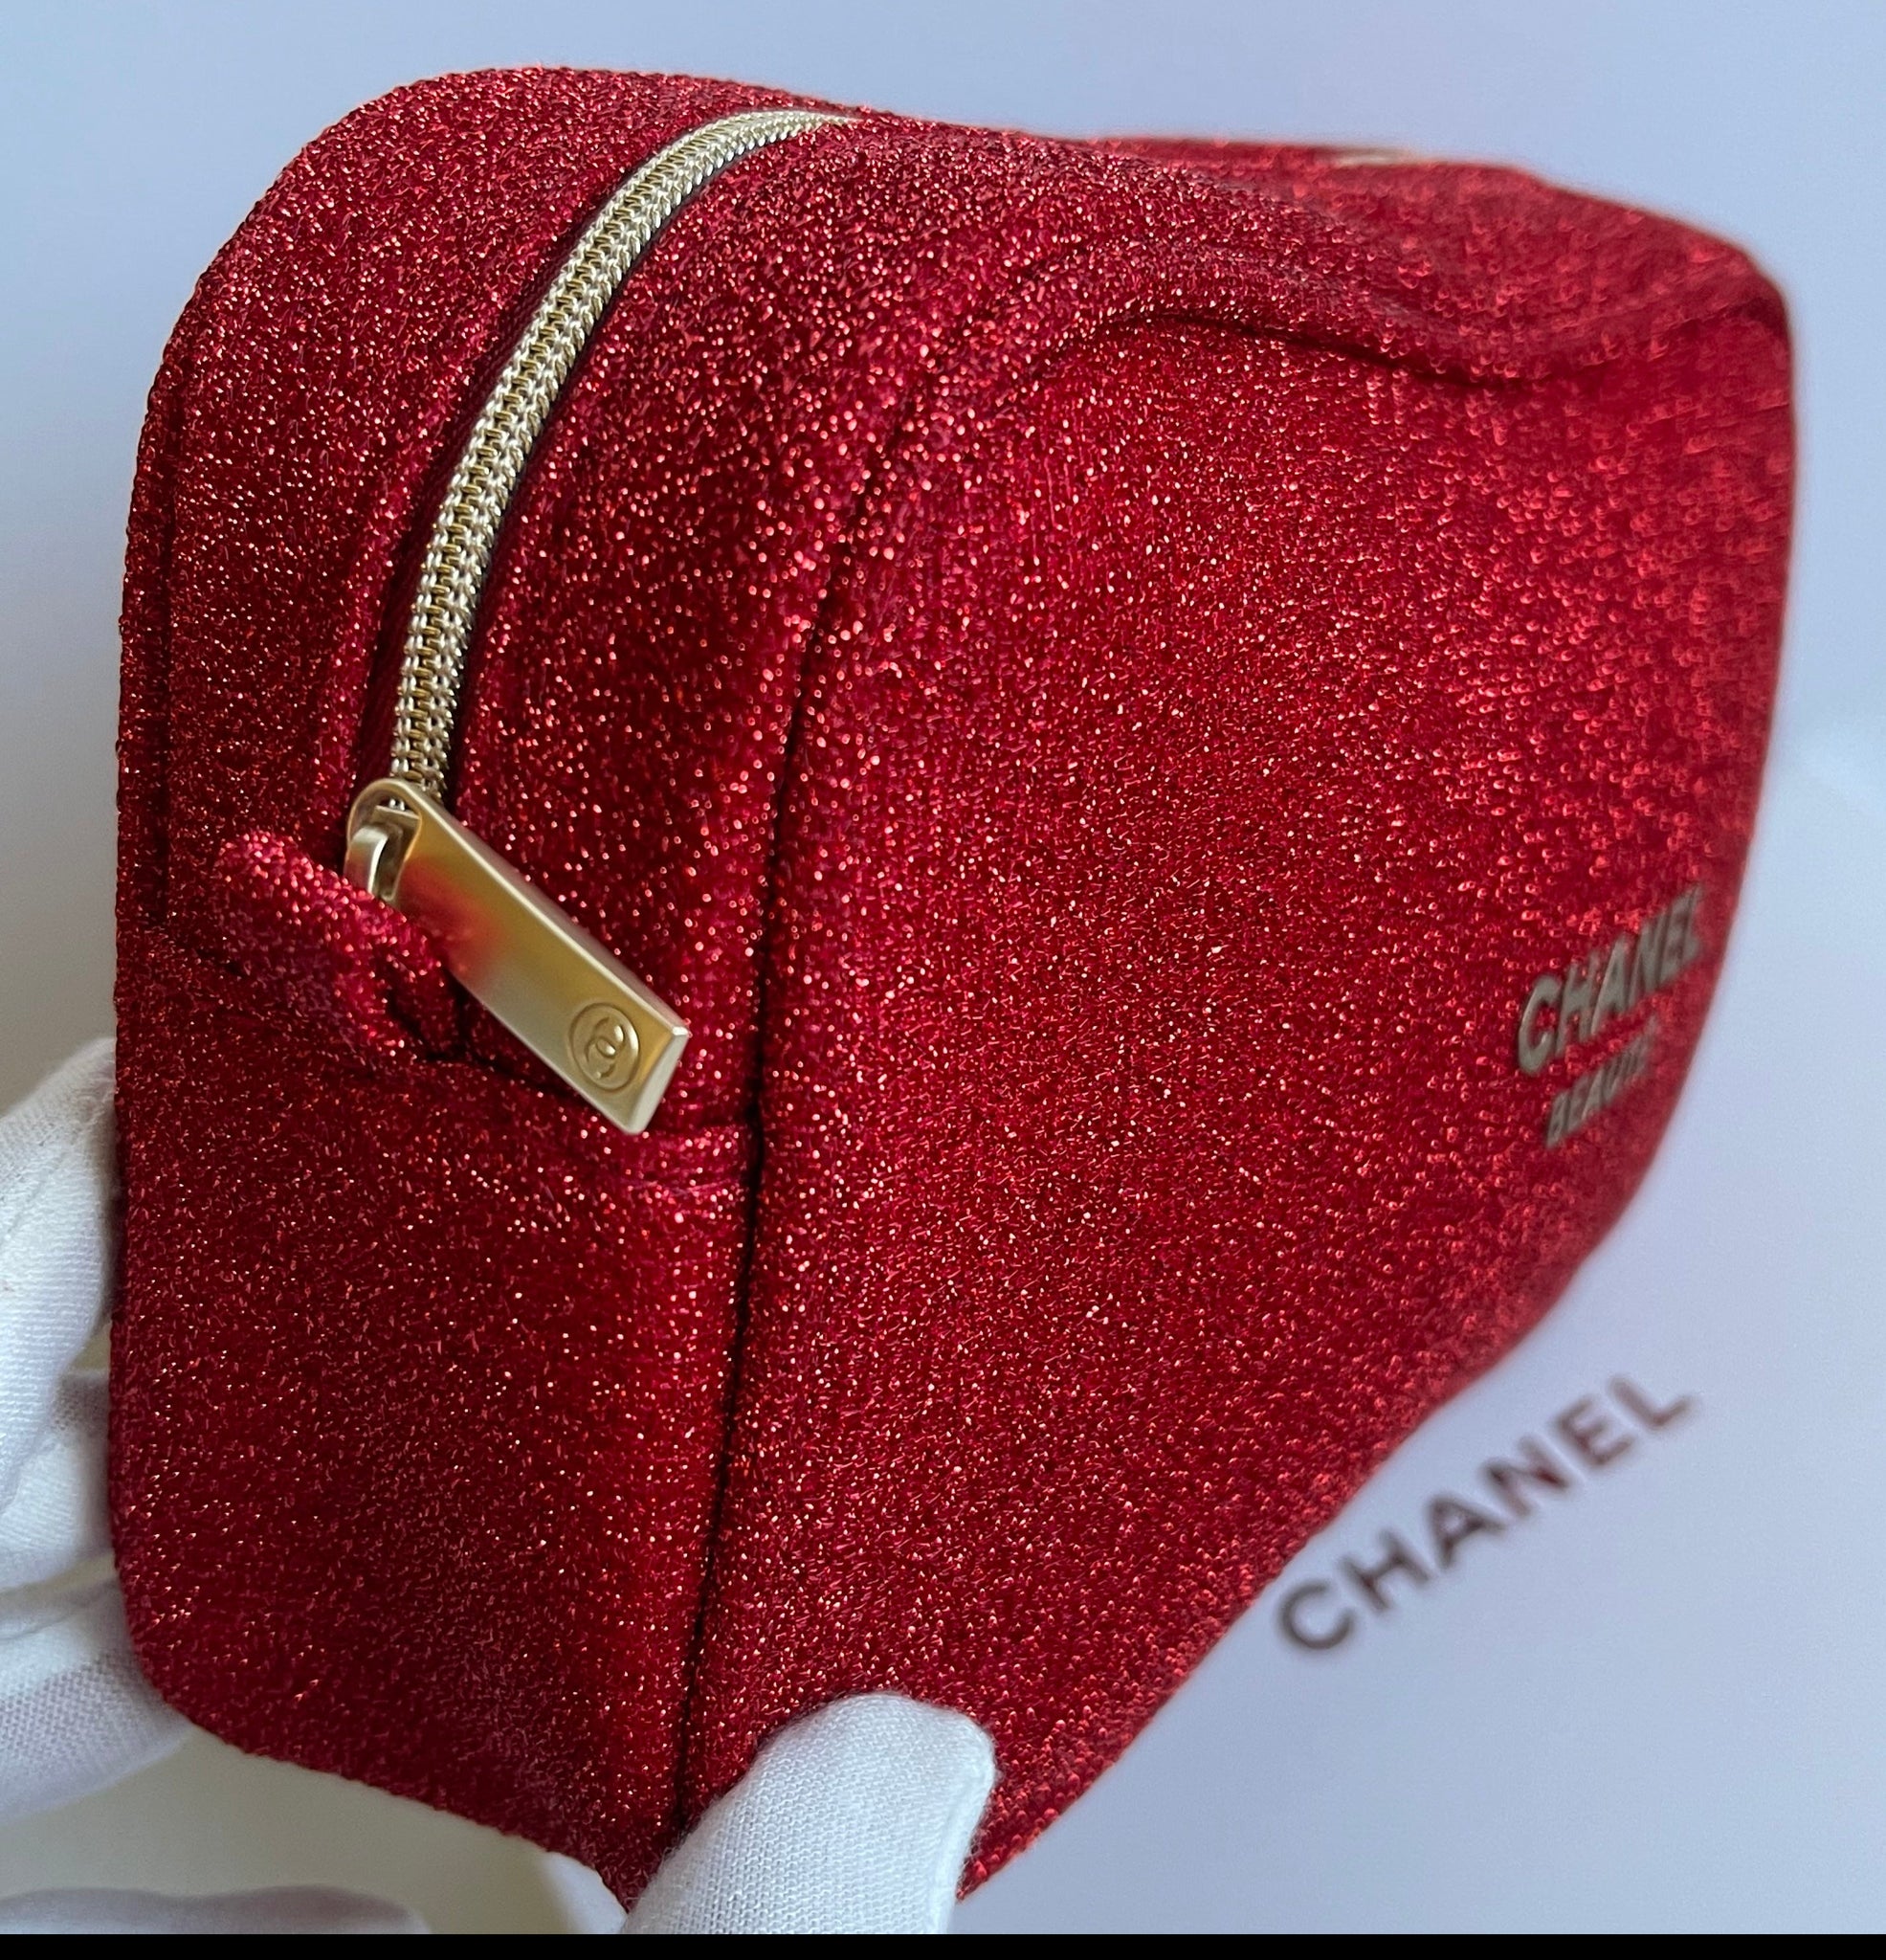 CHANEL Cosmetic/makeup Bag Pouch Clutch Red 2020 VIP Gift for sale online